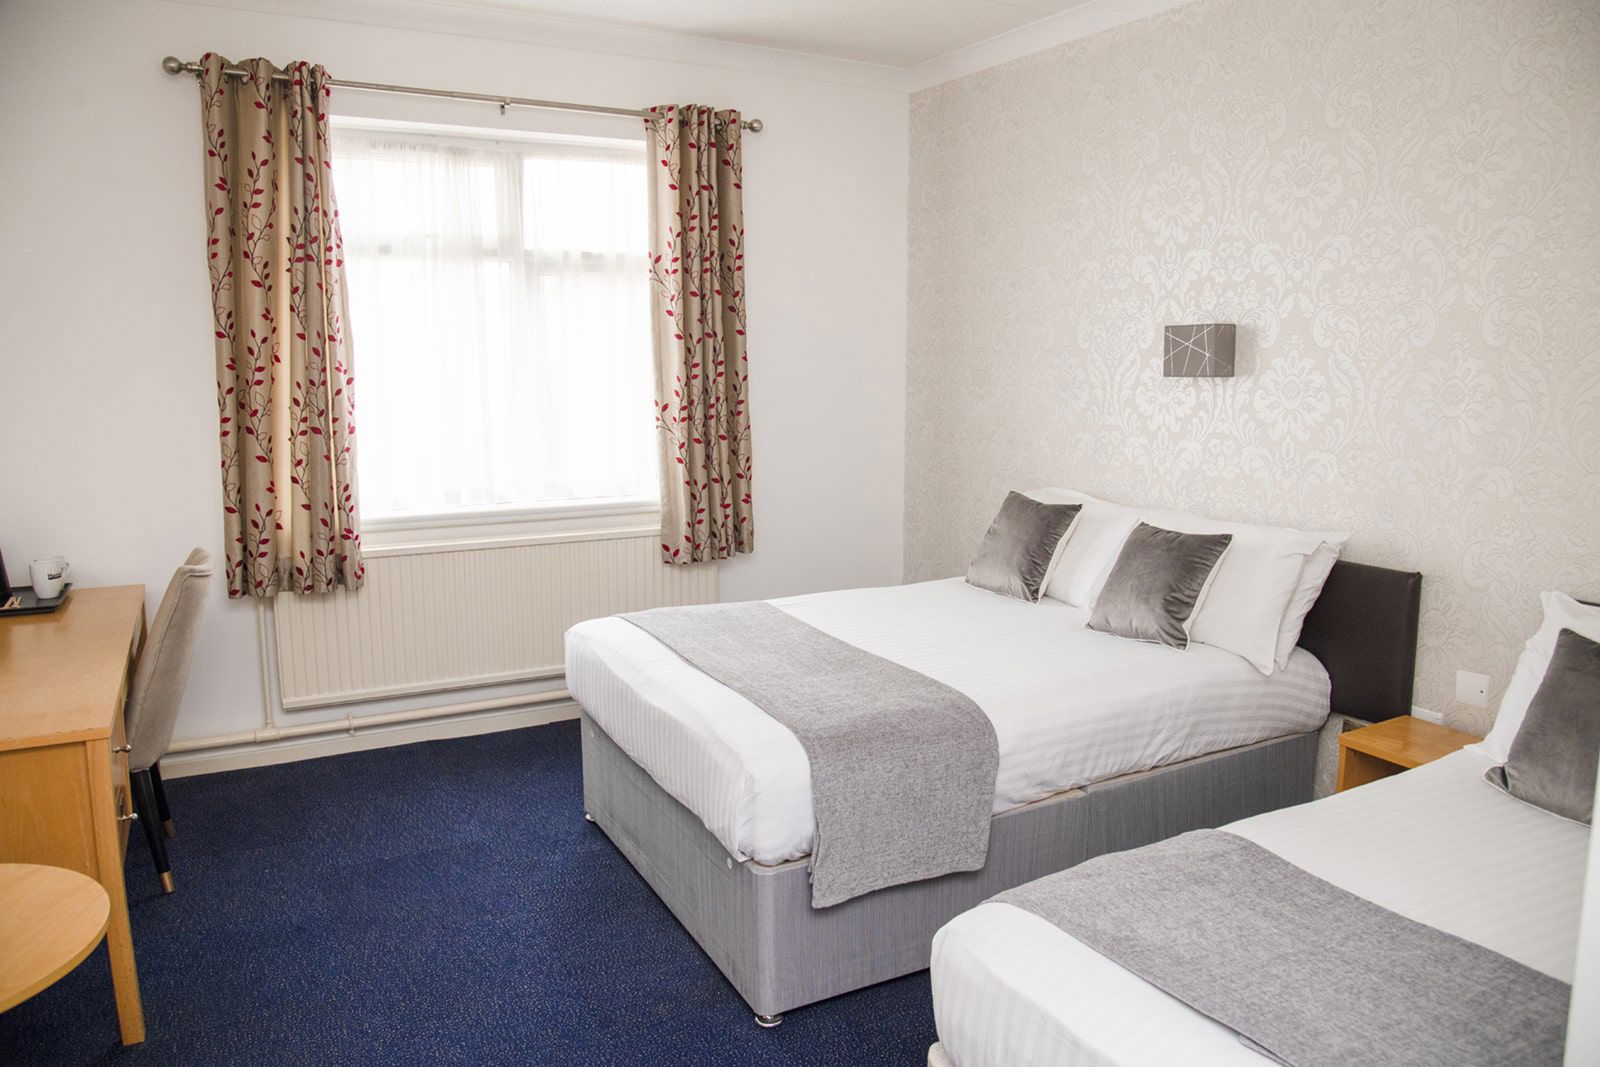 Hamlet Maidstone - Hotel in Maidstone - Perfect for Exploring the “Garden of England” 1